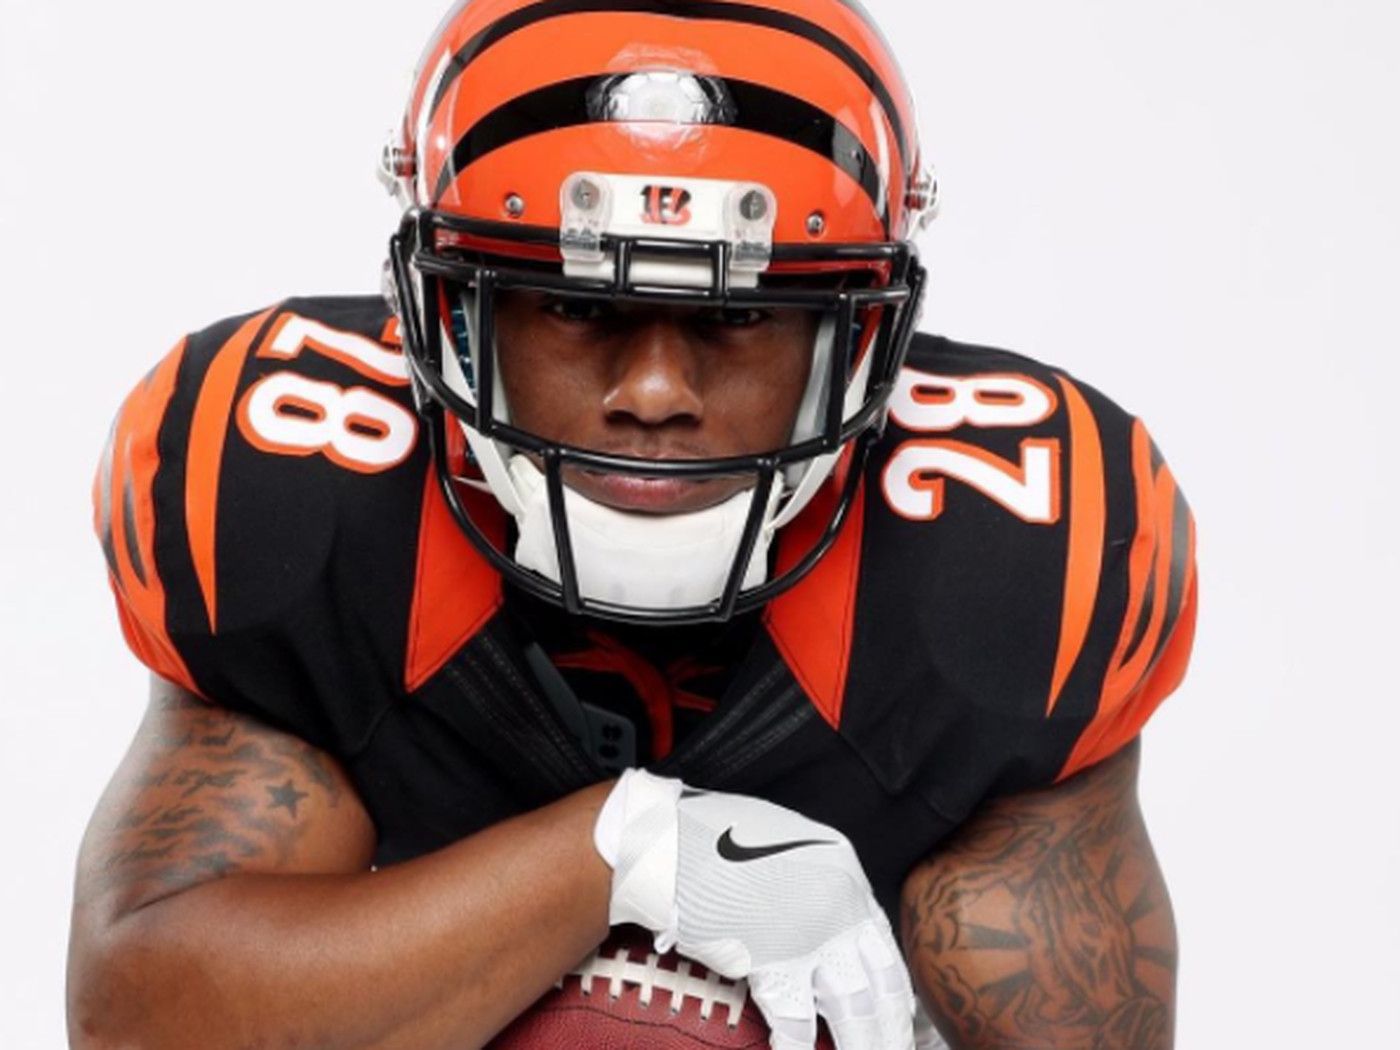 Getting to know the social side of Bengals rookie RB Joe Mixon